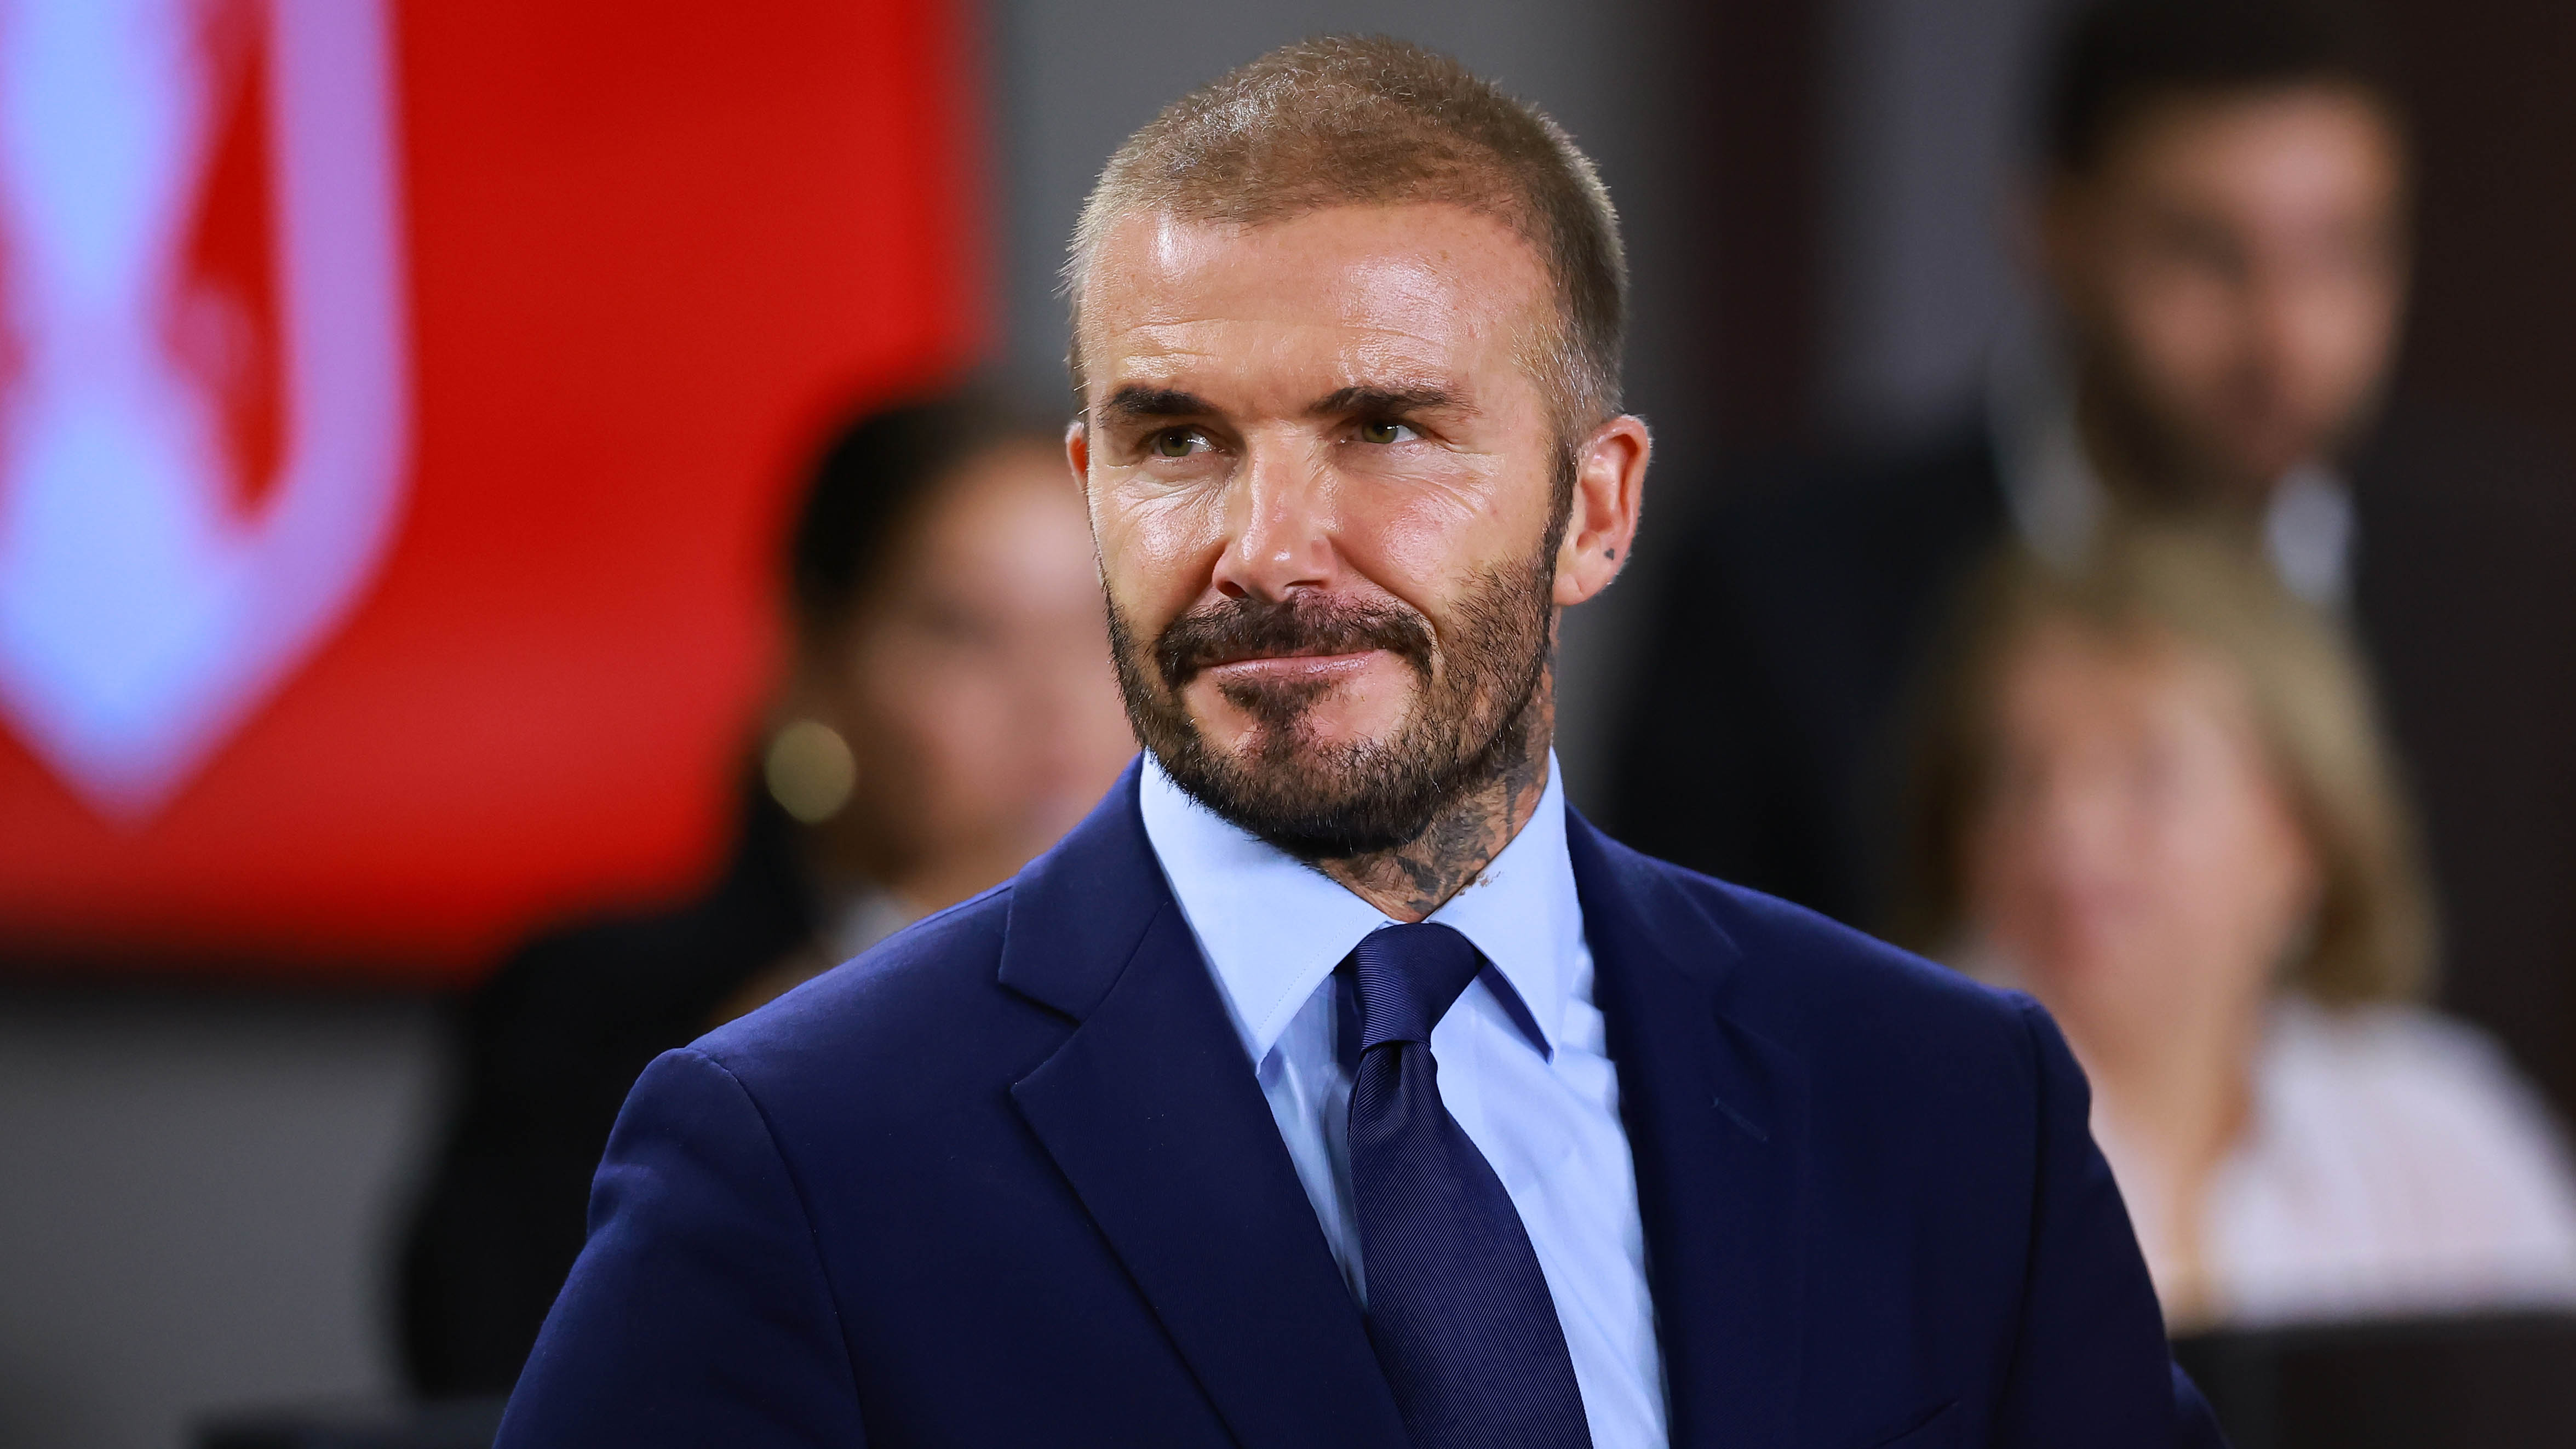 David Beckham reflects on his soccer career, mental health in